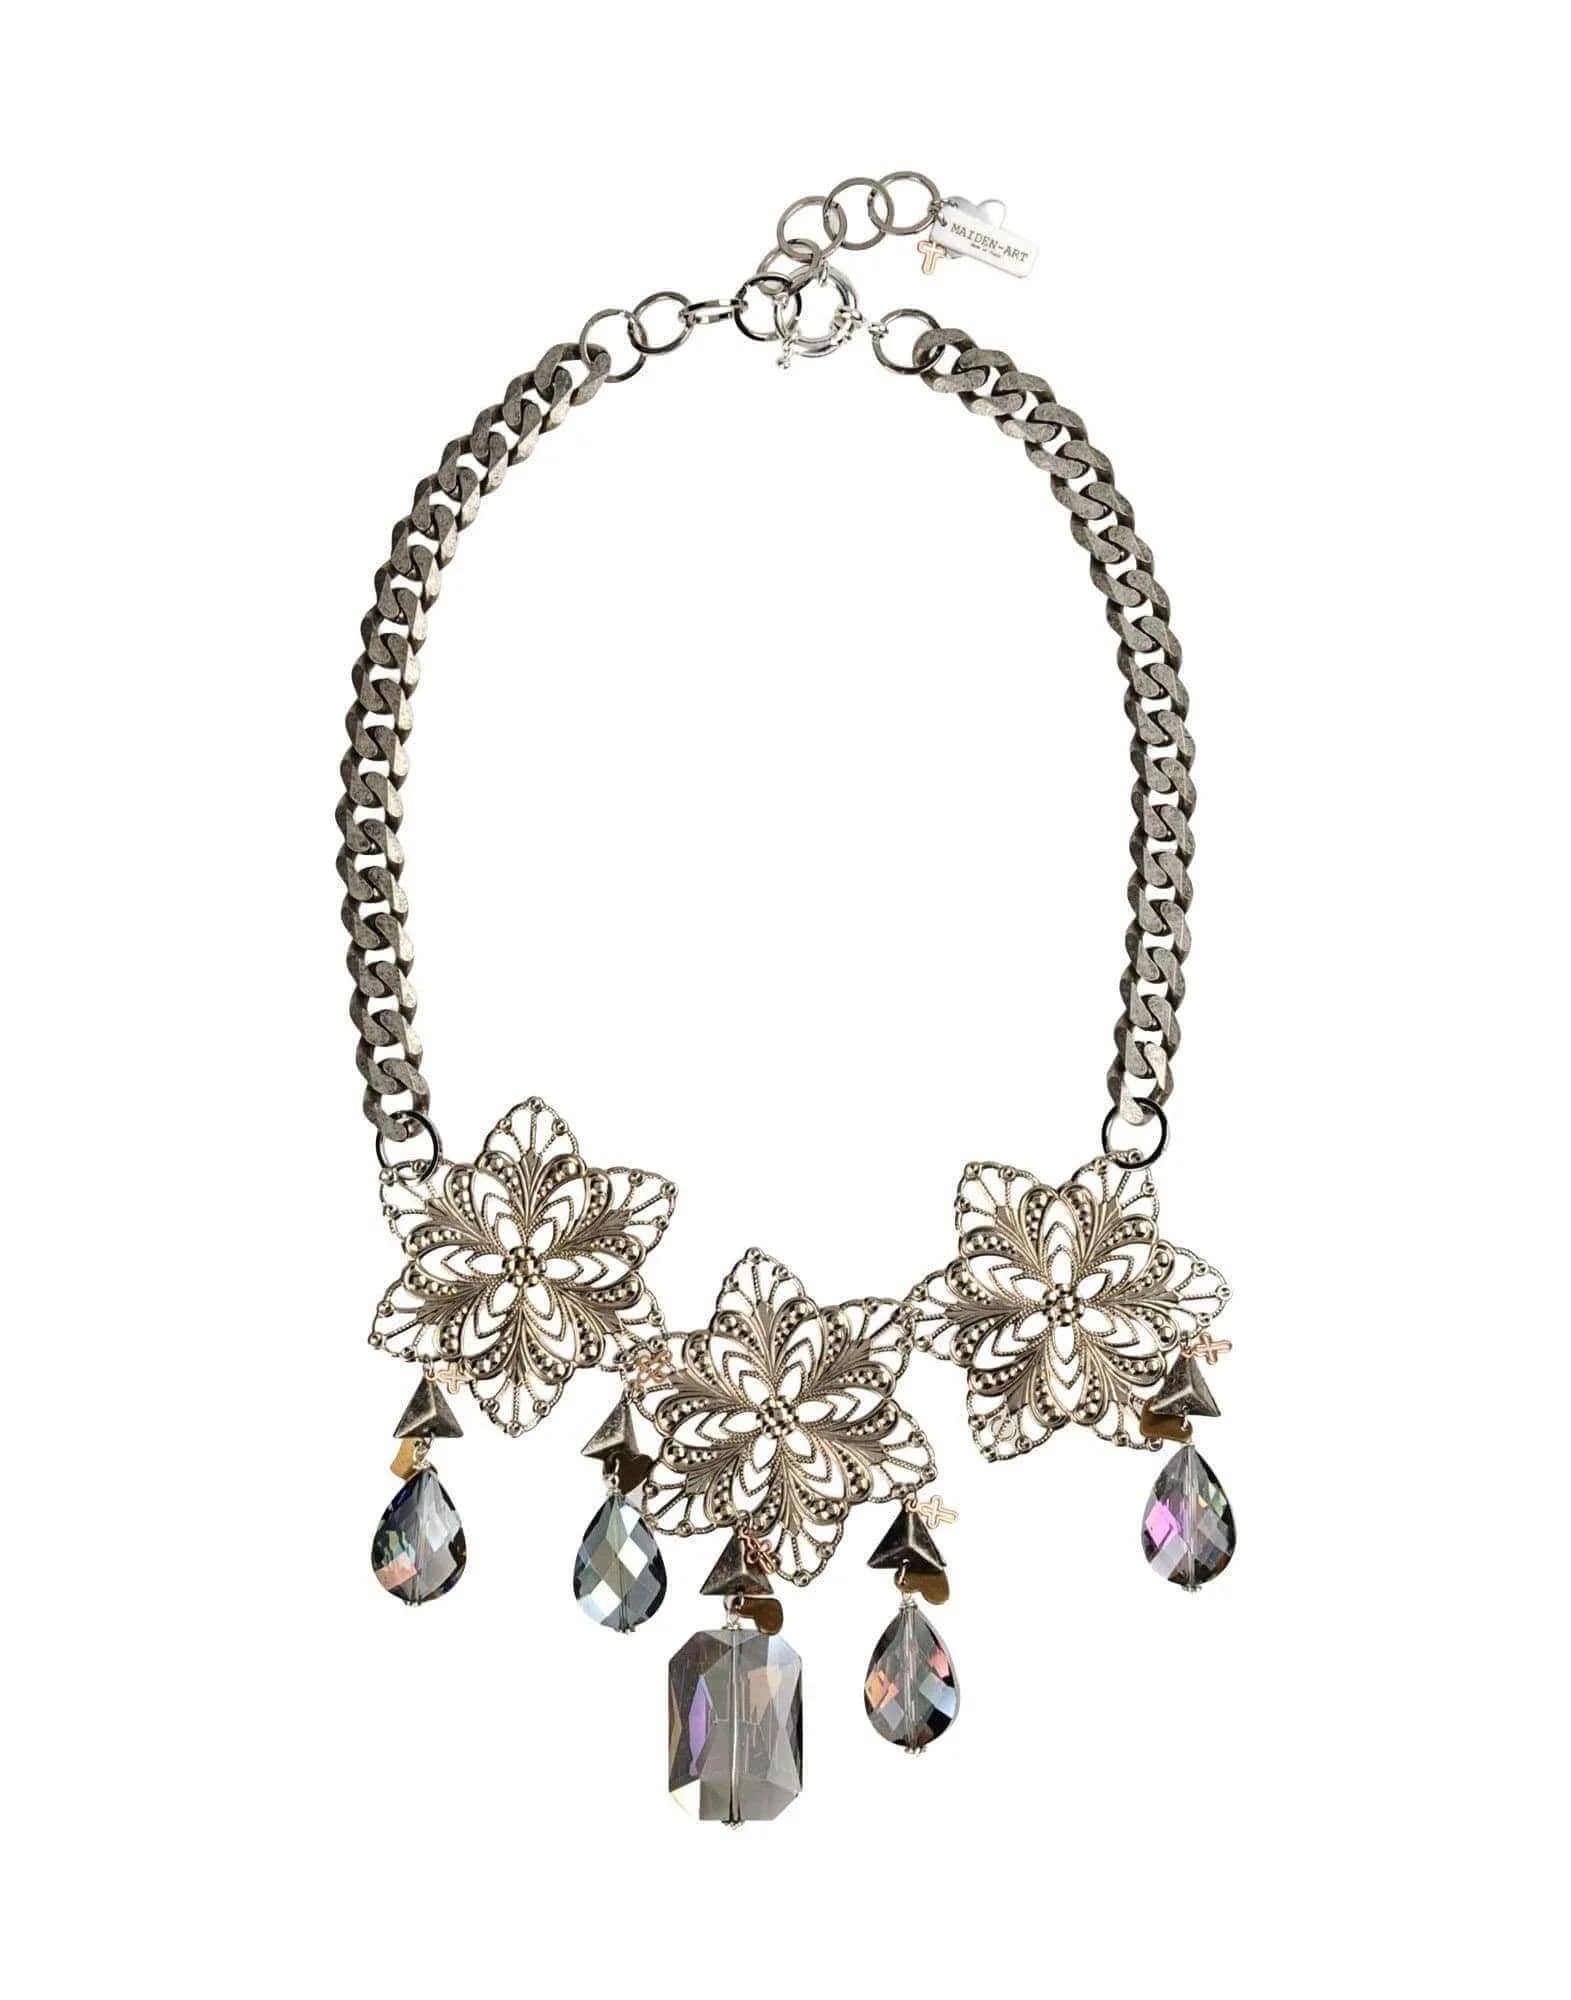 Silver bib necklace with crystals and beads - Maiden-Art